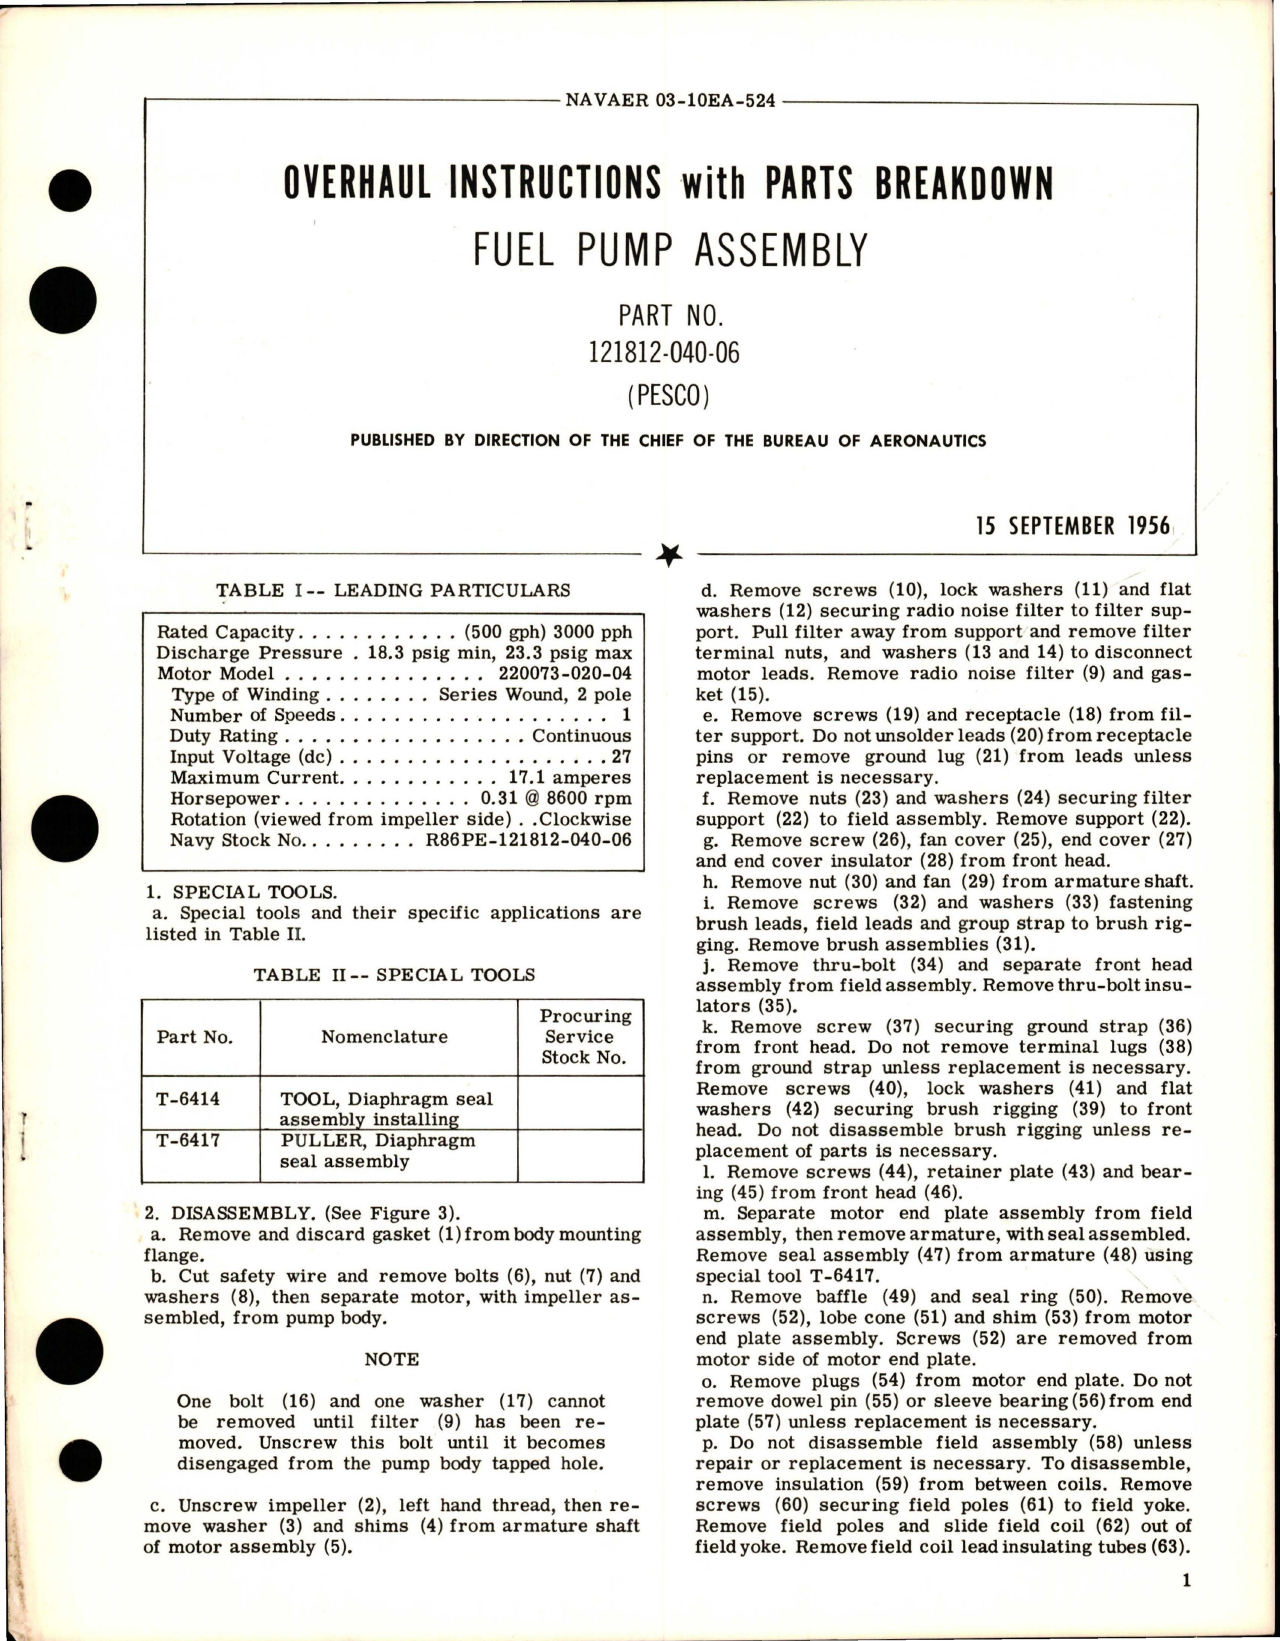 Sample page 1 from AirCorps Library document: Overhaul Instructions with Parts Breakdown for Fuel Pump Assembly - Part 121812-040-06